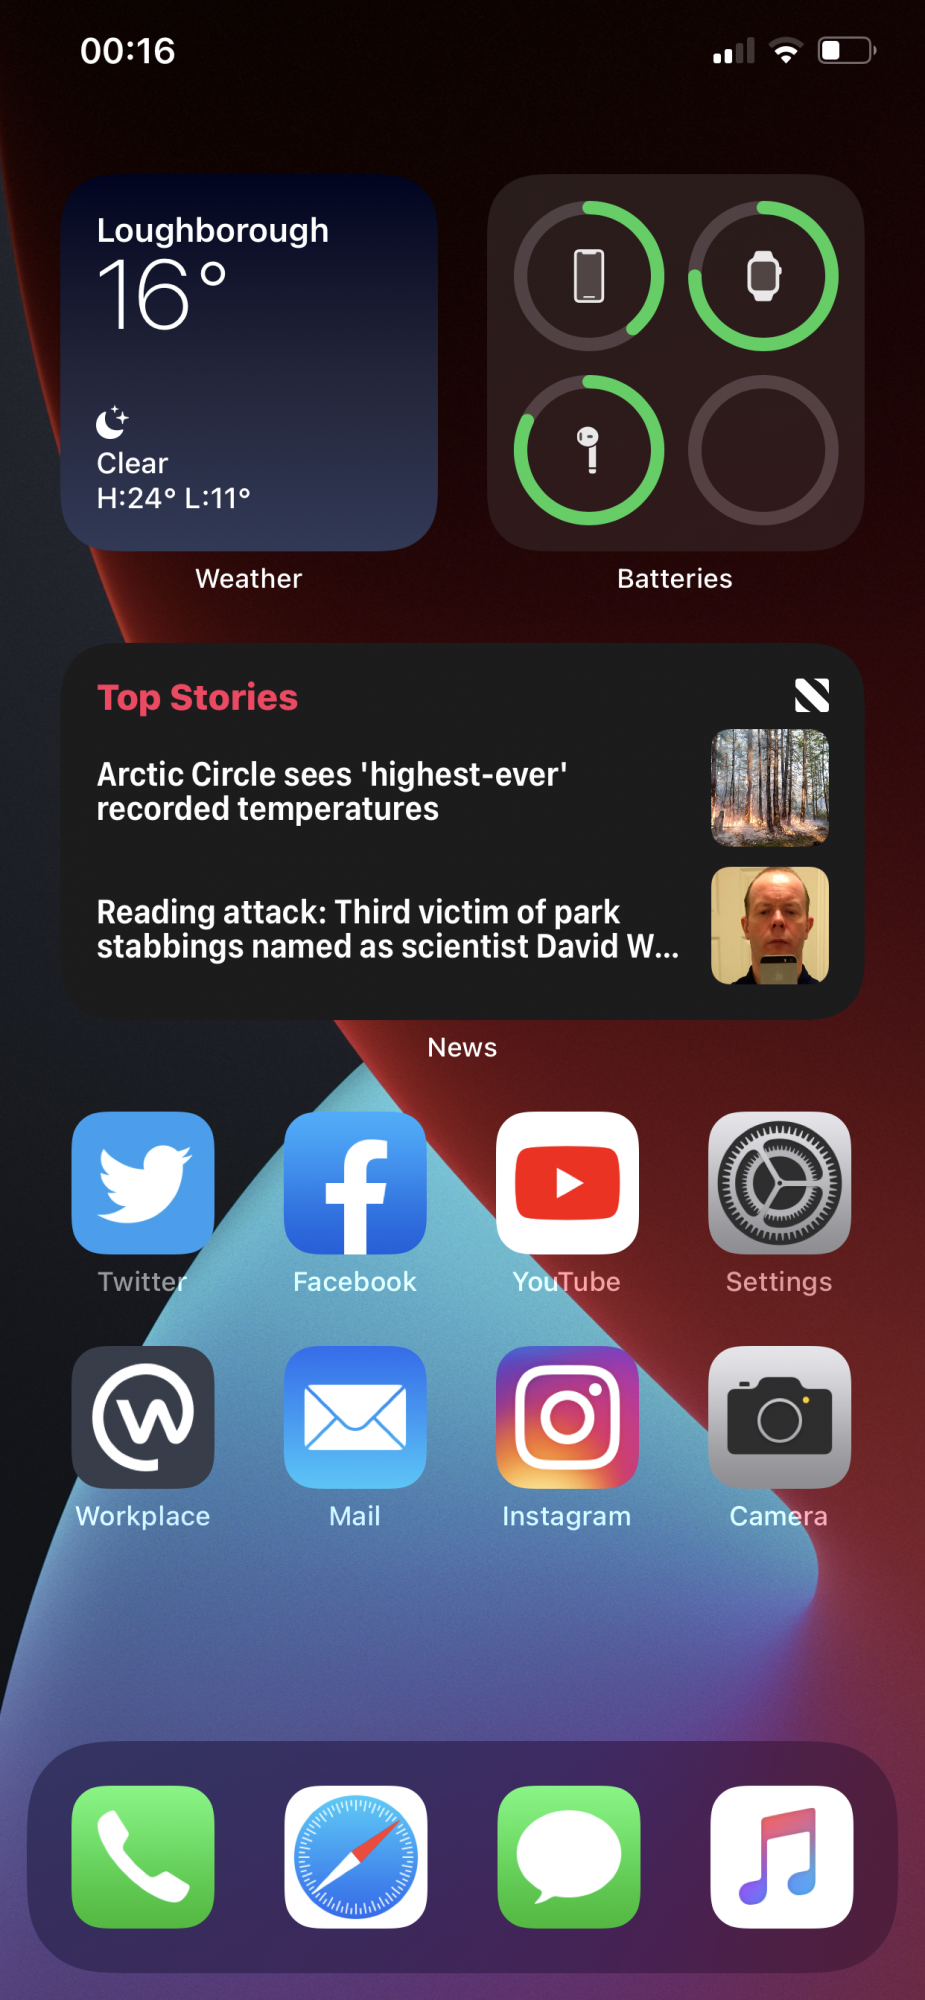 Post your iOS 14 home screen layout | MacRumors Forums